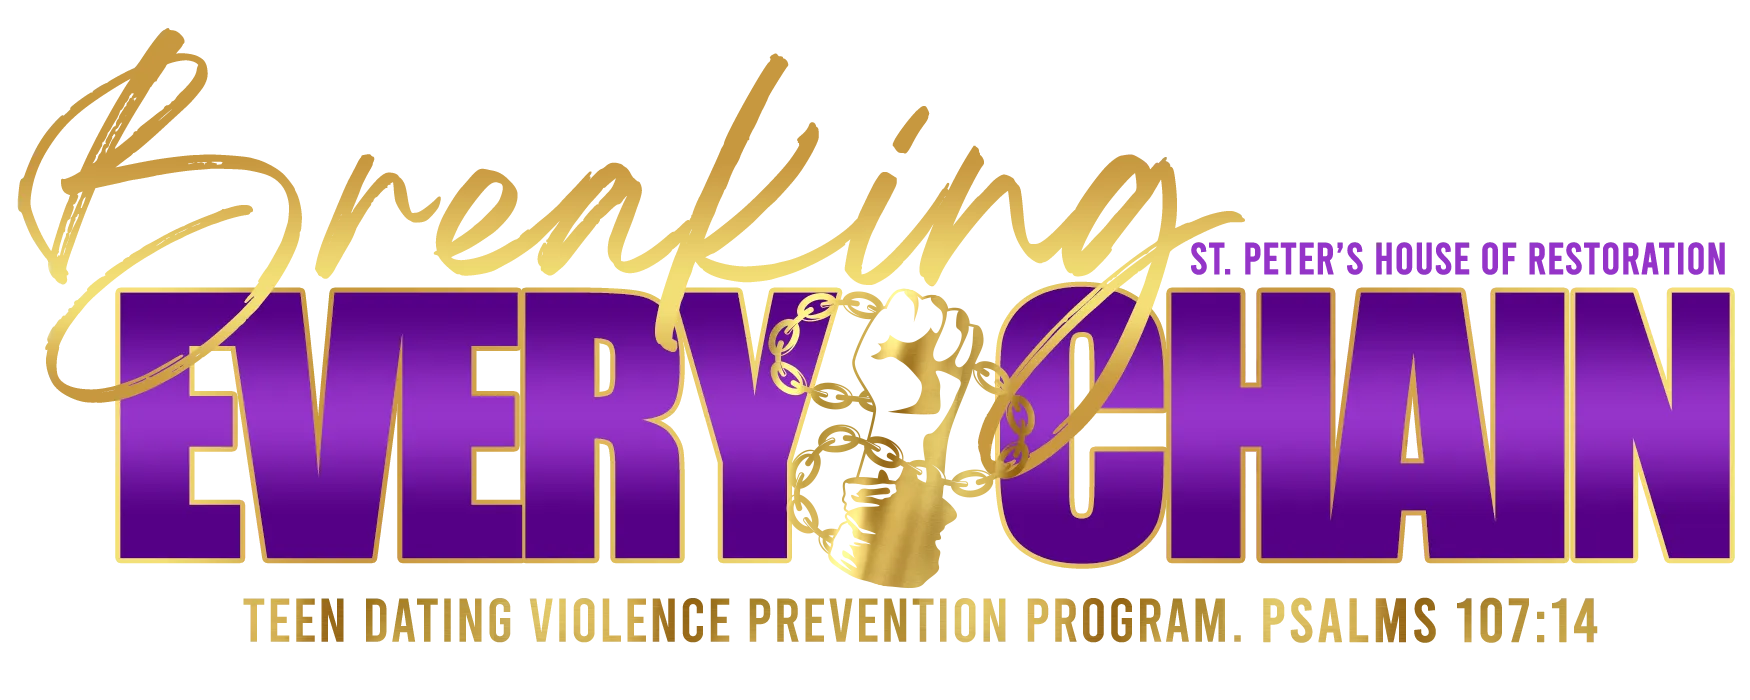 Breaking Every Chain Teen Dating Violence Prevention Program